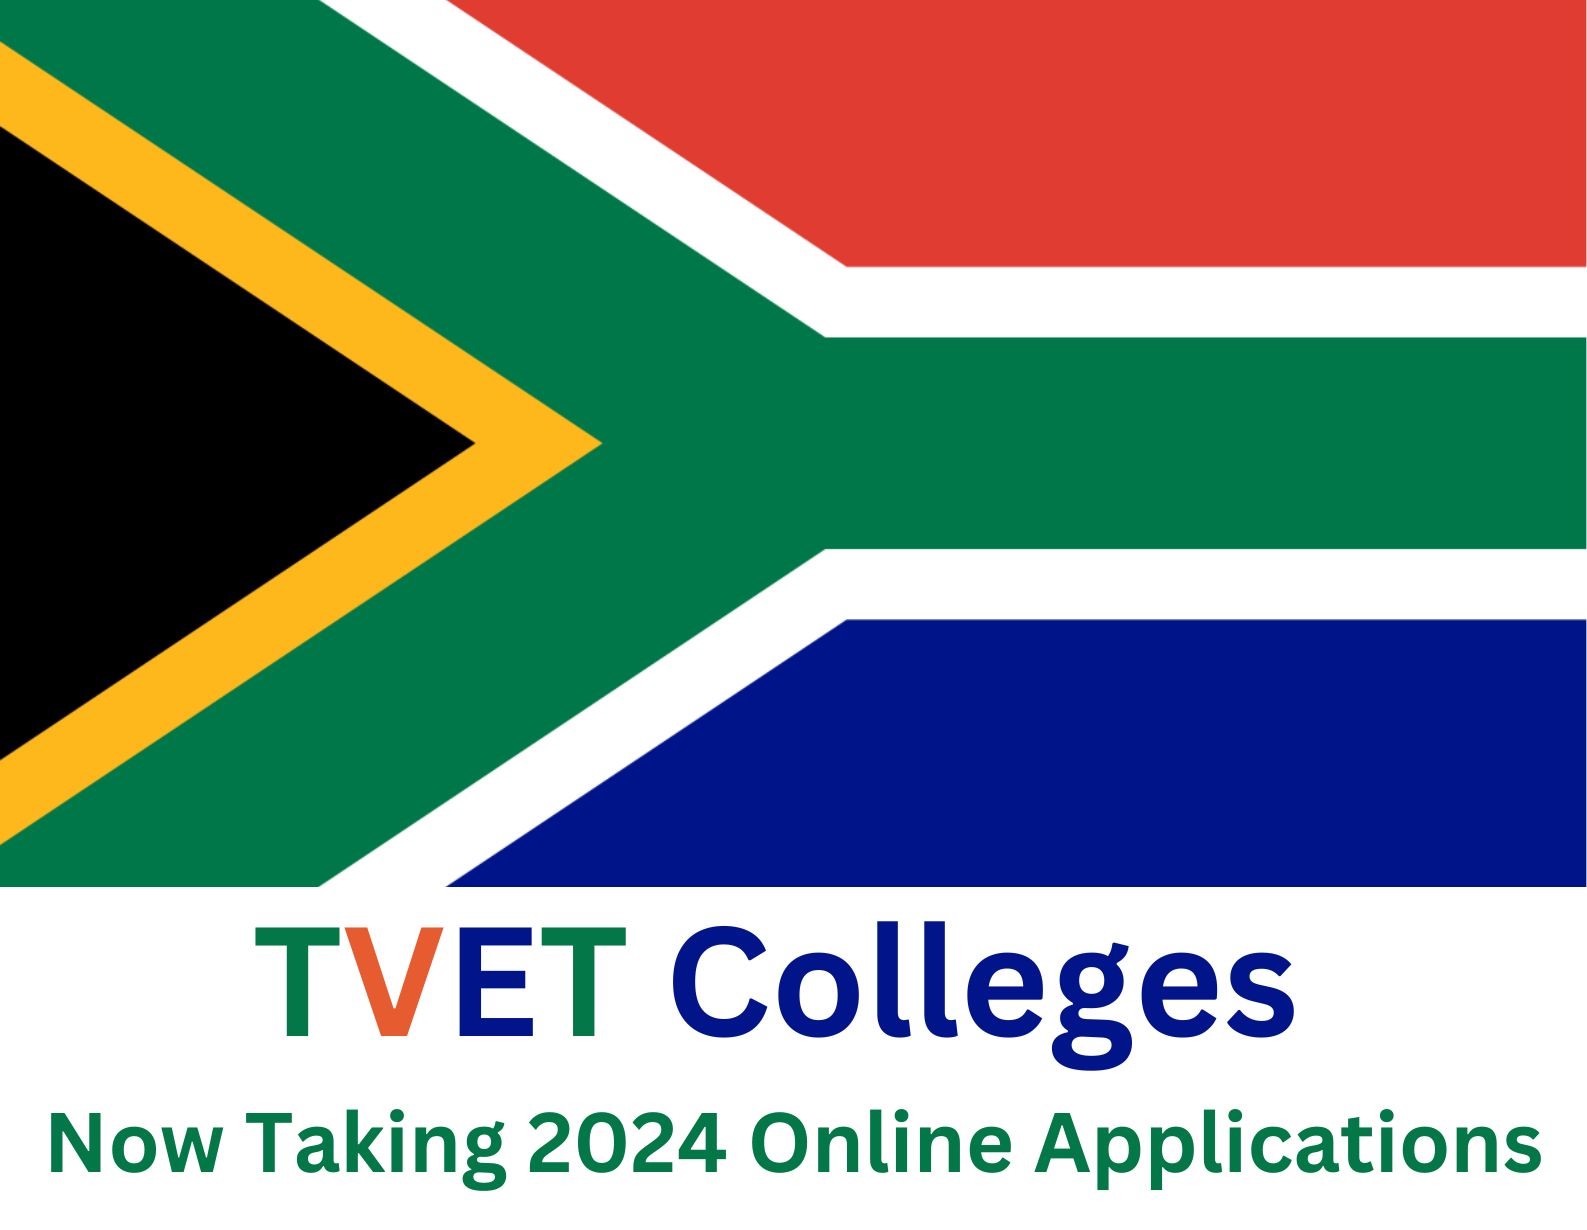 How to Submit Your TVET College Application